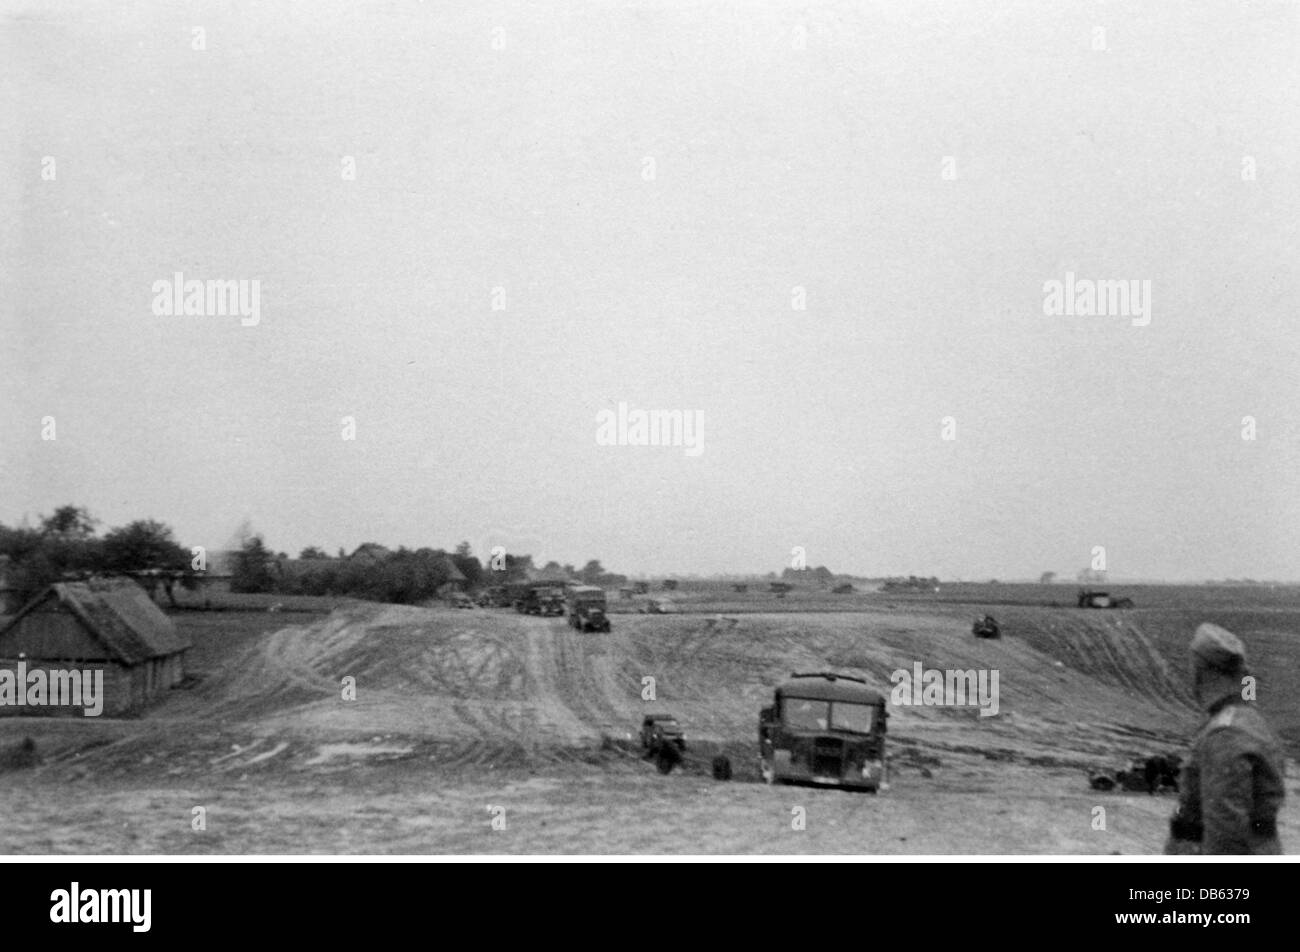 events, Second World War / WWII, Soviet Union, Operation 'Barbarossa' (German invasion of the Soviet Union), Wehrmacht convoy on a country road in the Ukraine, sector of Panzer Group Kleist, Army Group South, summer 1941, Additional-Rights-Clearences-Not Available Stock Photo